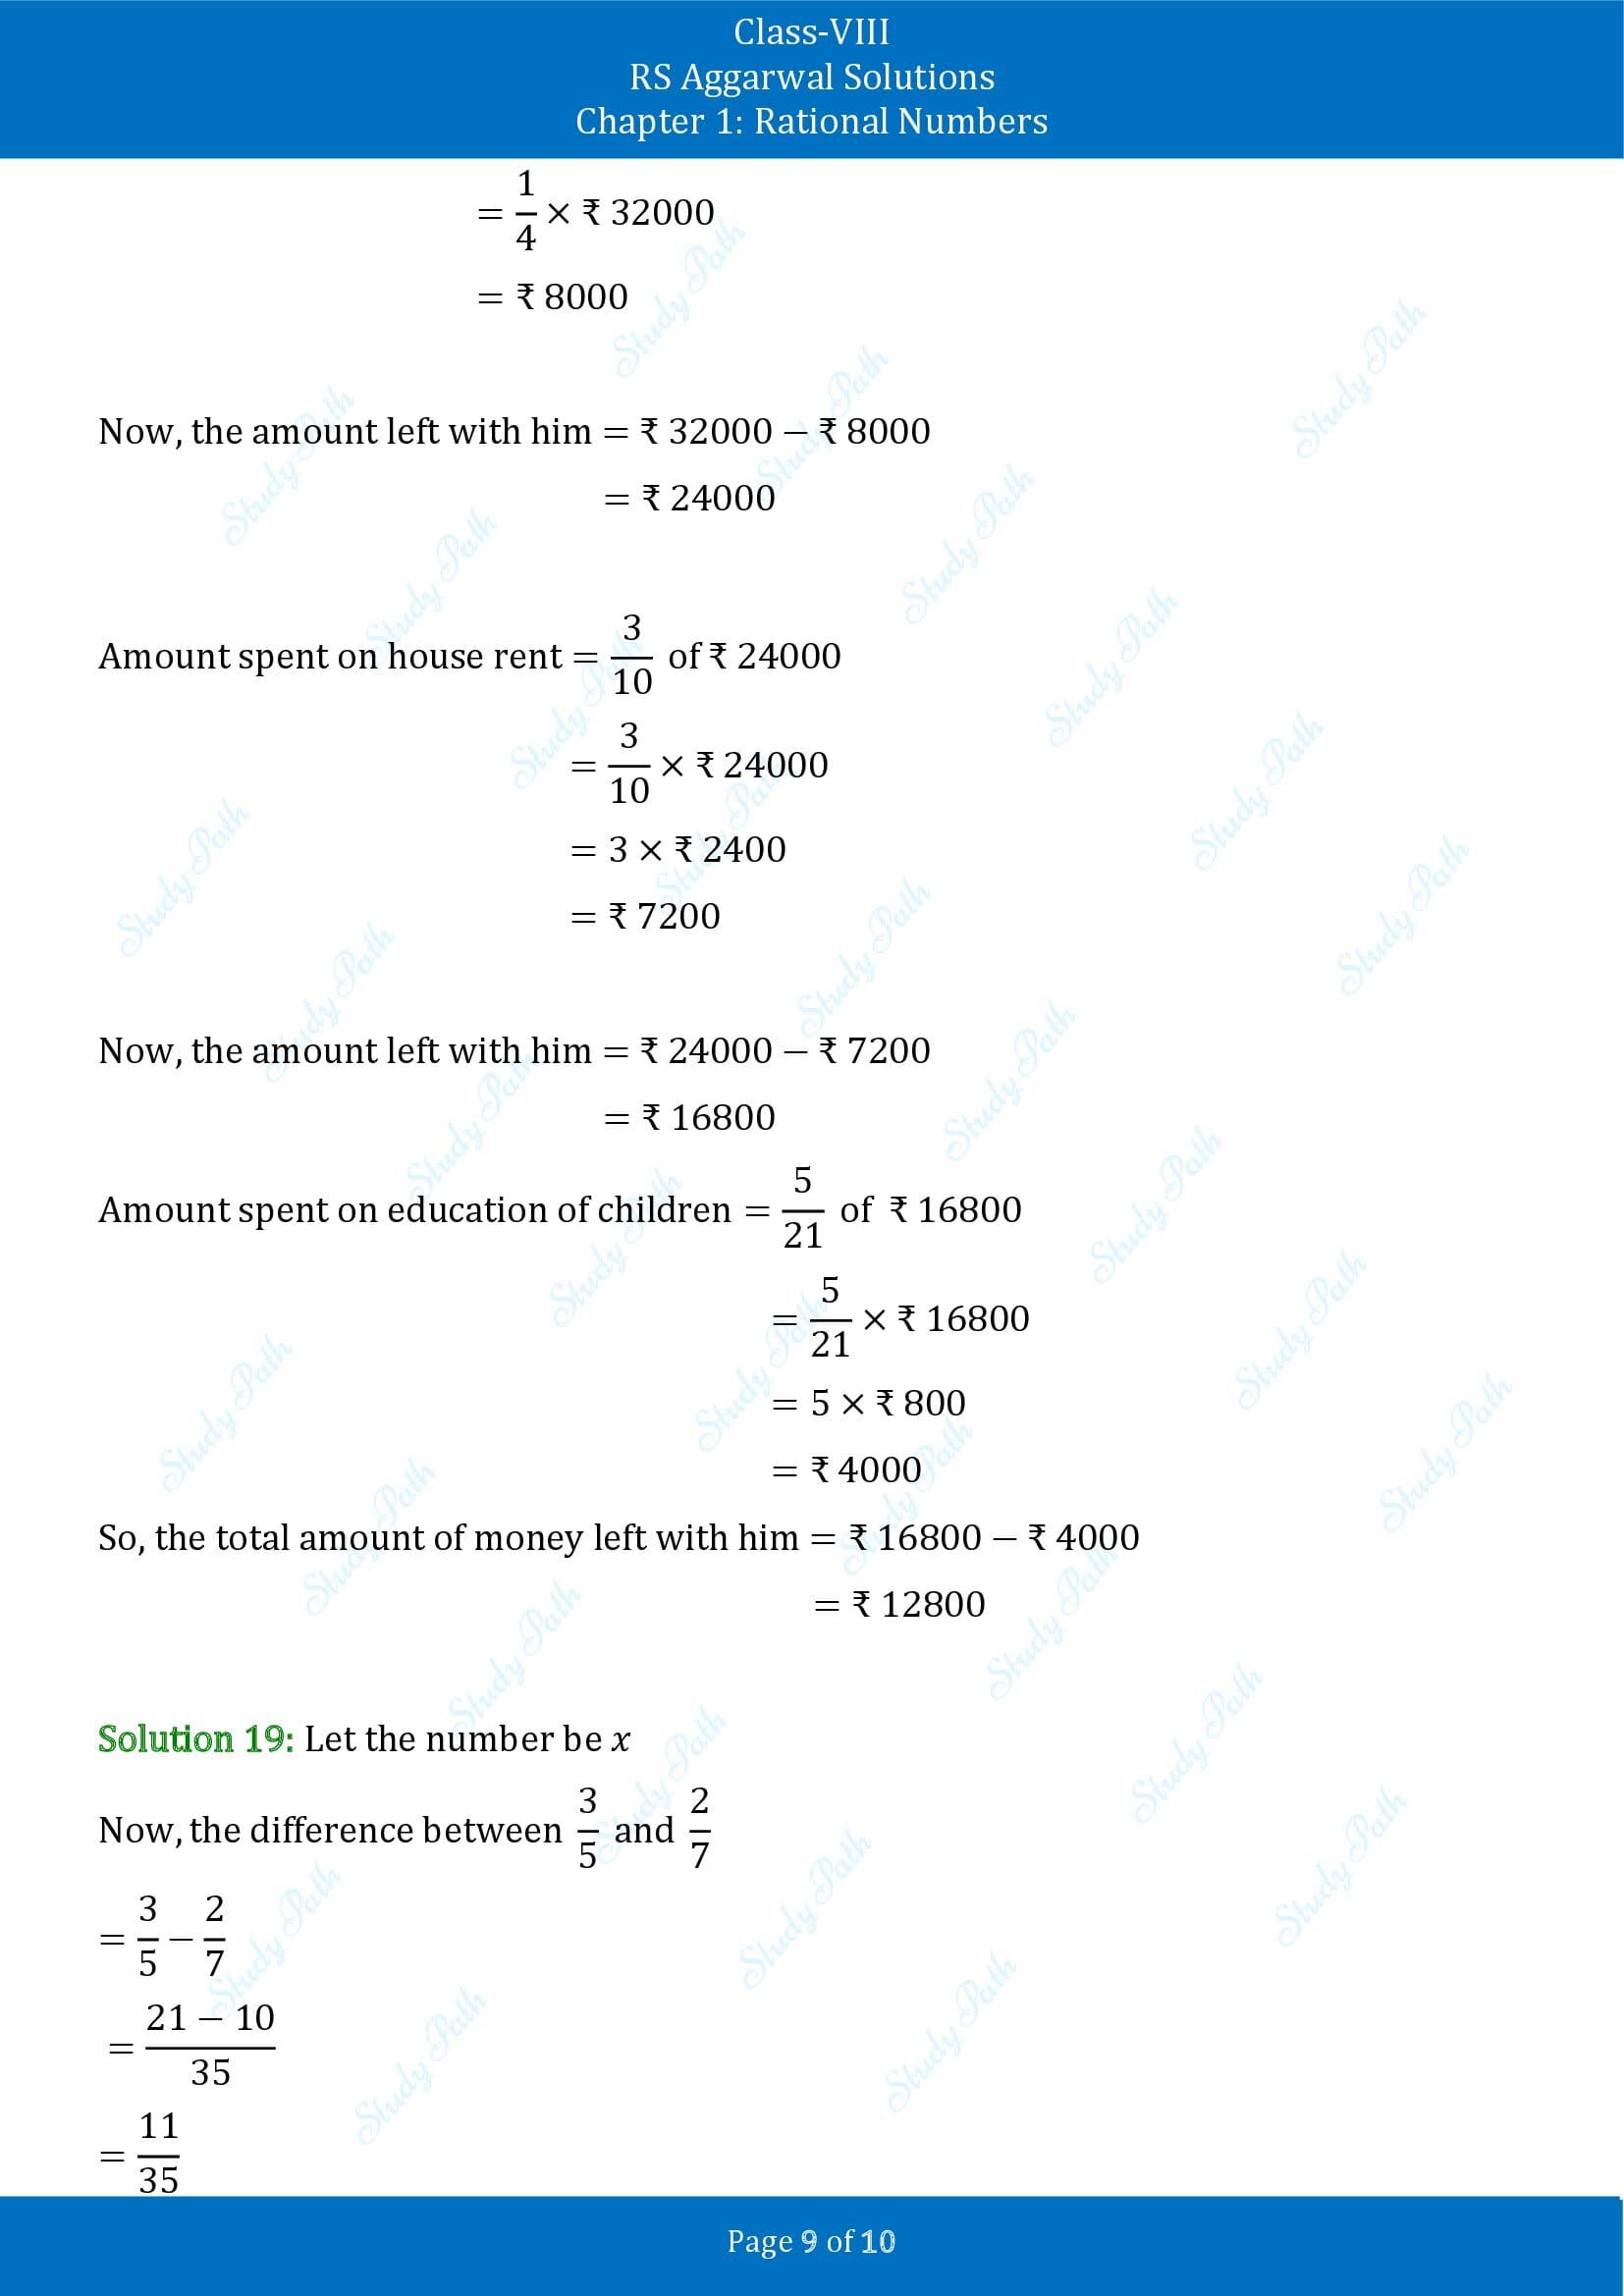 RS Aggarwal Solutions Class 8 Chapter 1 Rational Numbers Exercise 1G 00009